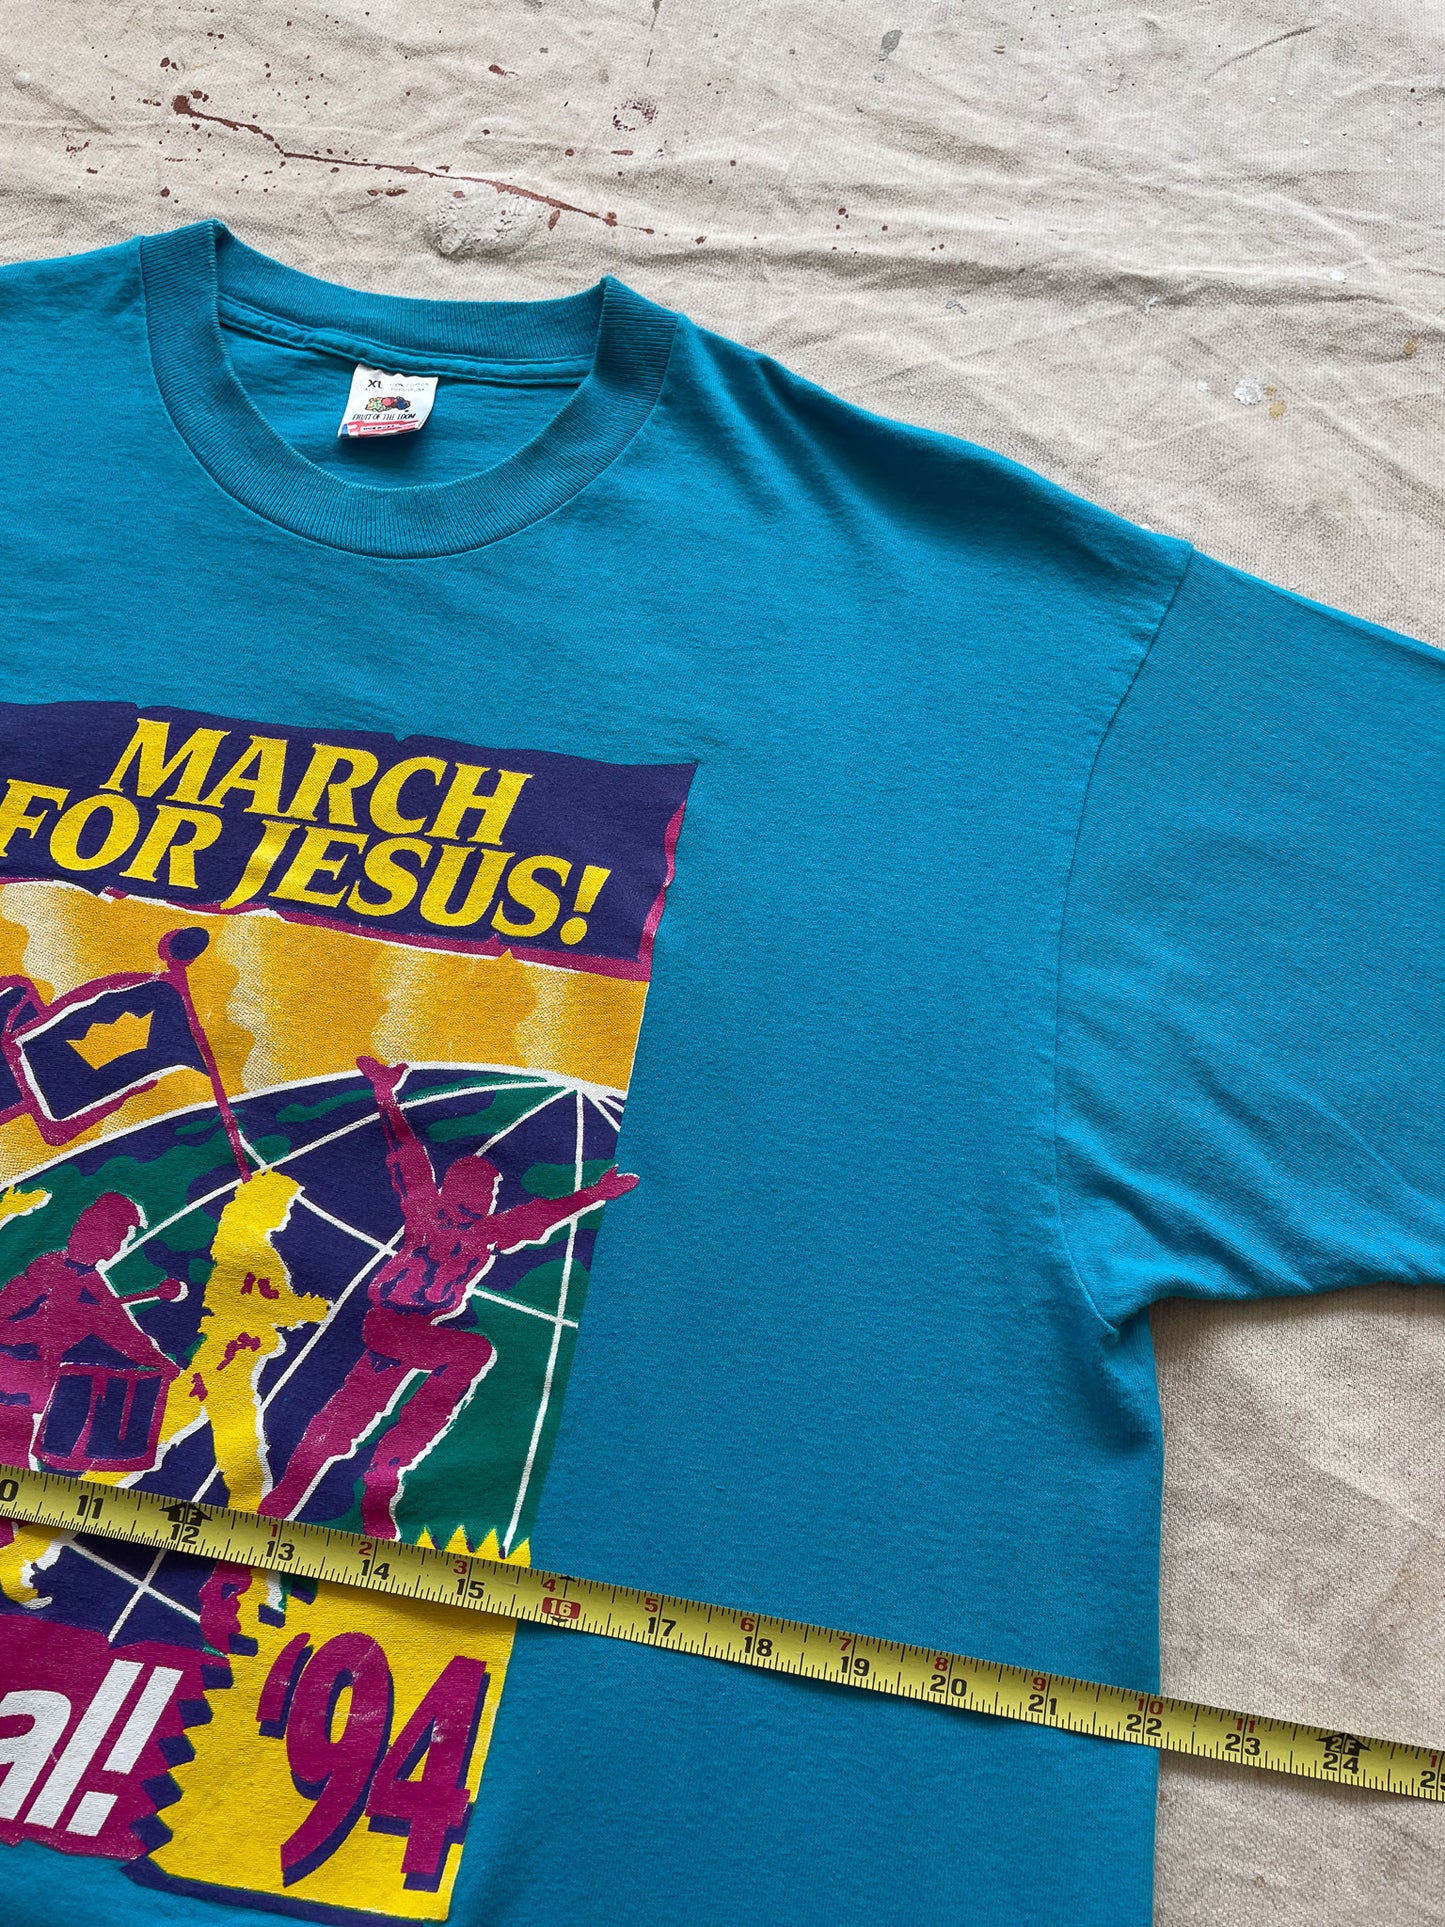 March For Jesus T-Shirt—[XL]